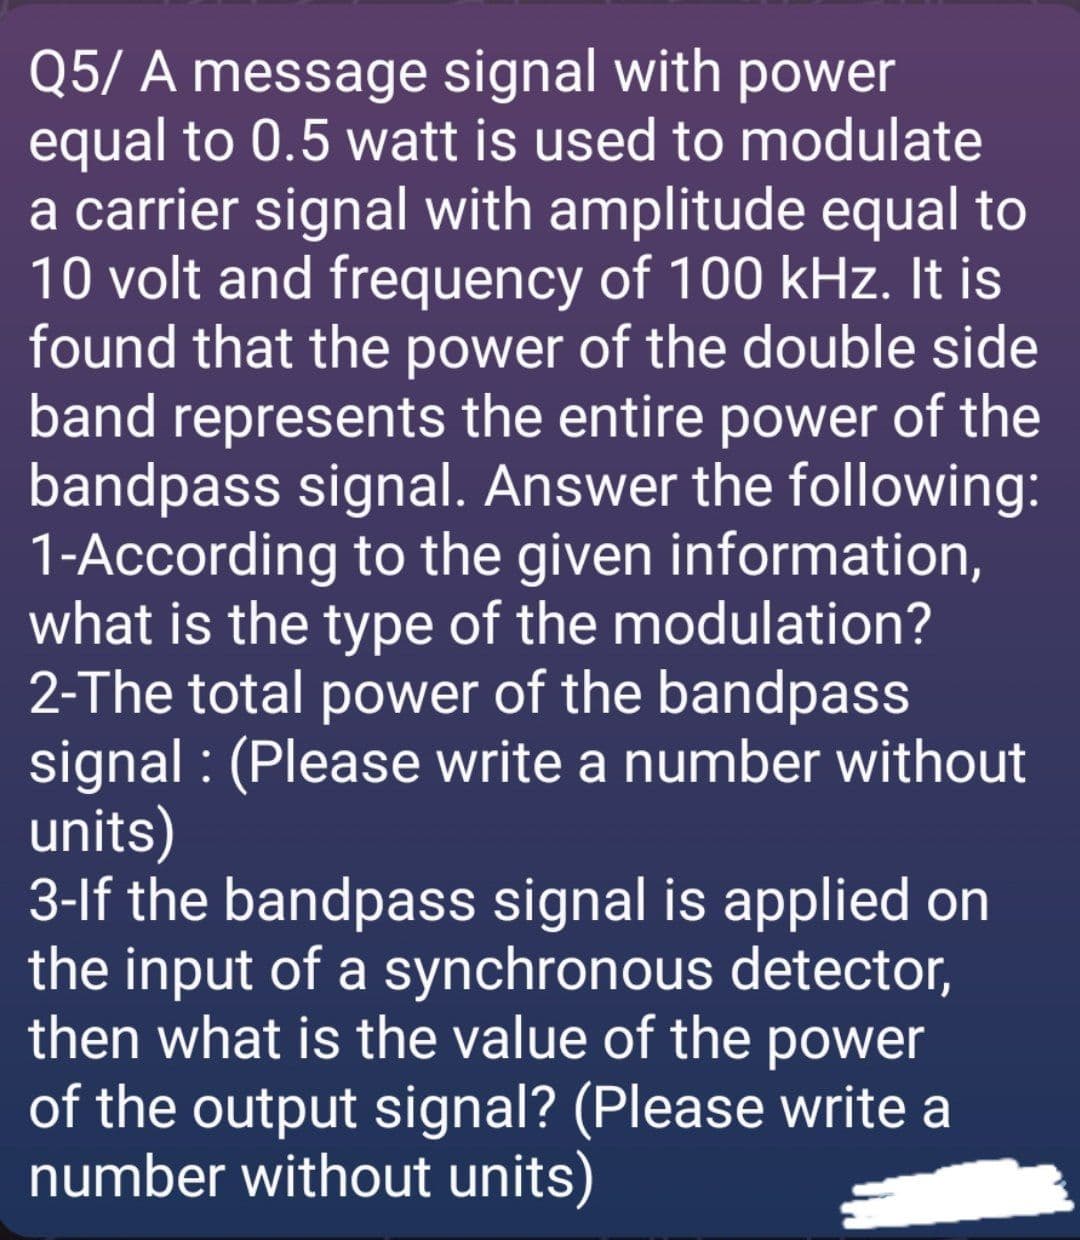 Q5/ A message signal with power
equal to 0.5 watt is used to modulate
a carrier signal with amplitude equal to
10 volt and frequency of 100 kHz. It is
found that the power of the double side
band represents the entire power of the
bandpass signal. Answer the following:
1-According to the given information,
what is the type of the modulation?
2-The total power of the bandpass
signal : (Please write a number without
units)
3-lf the bandpass signal is applied on
the input of a synchronous detector,
then what is the value of the power
of the output signal? (Please write a
number without units)
